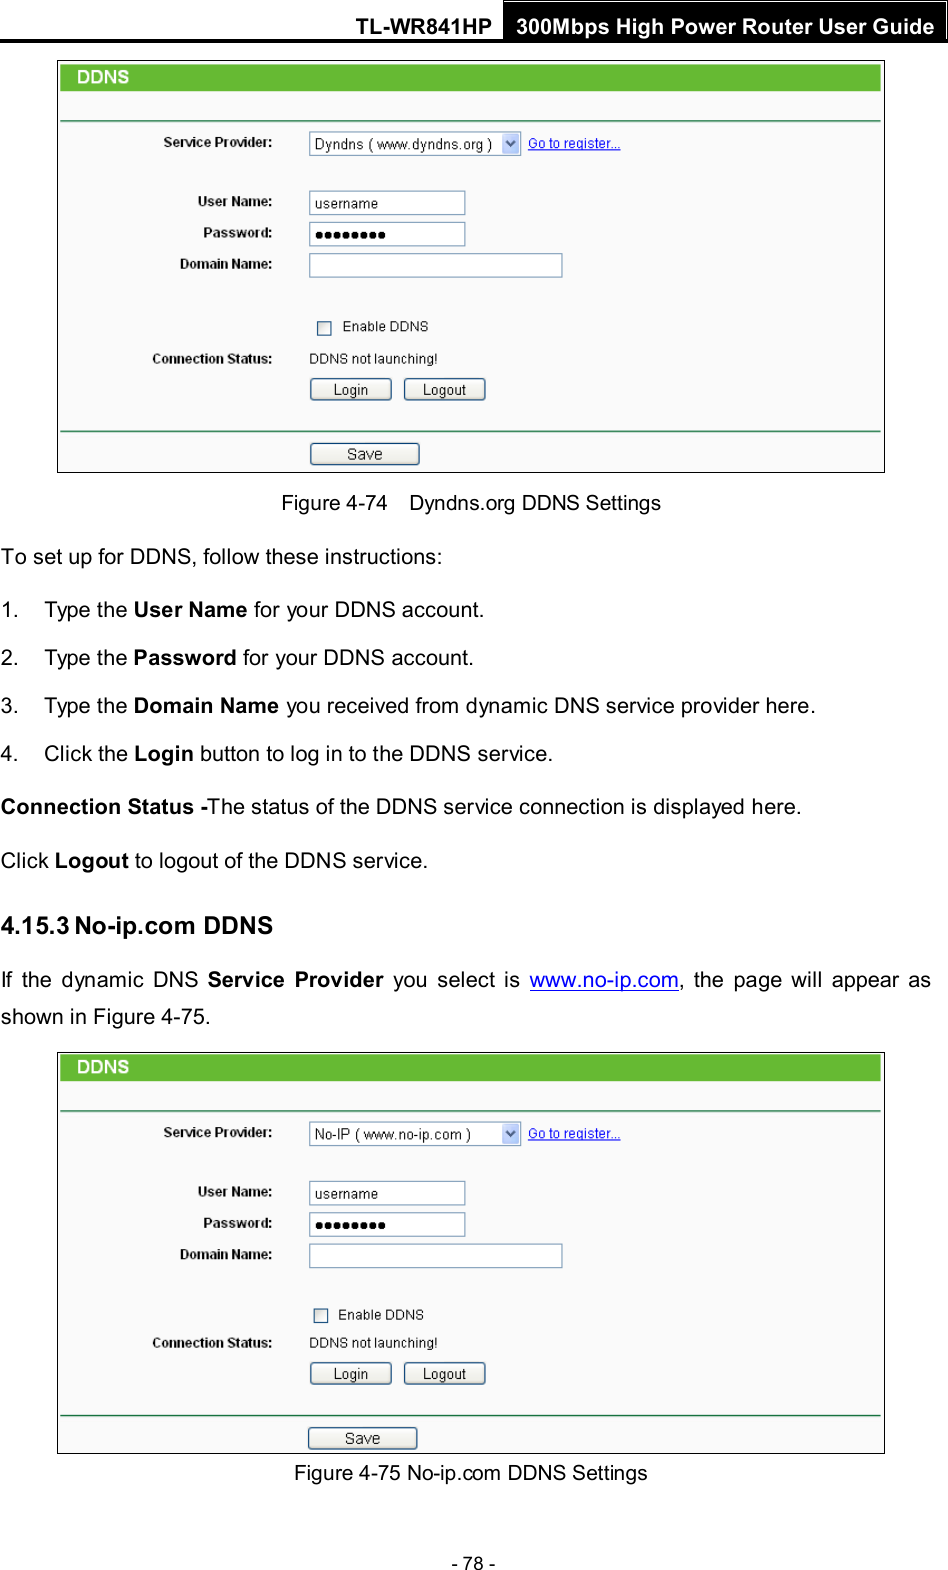 TL-WR841HP 300Mbps High Power Router User Guide  - 78 -  Figure 4-74  Dyndns.org DDNS Settings To set up for DDNS, follow these instructions: 1. Type the User Name for your DDNS account.   2. Type the Password for your DDNS account.   3. Type the Domain Name you received from dynamic DNS service provider here.   4. Click the Login button to log in to the DDNS service. Connection Status -The status of the DDNS service connection is displayed here. Click Logout to logout of the DDNS service.   4.15.3 No-ip.com DDNS If  the  dynamic DNS Service Provider you select is www.no-ip.com,  the page will appear as shown in Figure 4-75.  Figure 4-75 No-ip.com DDNS Settings 